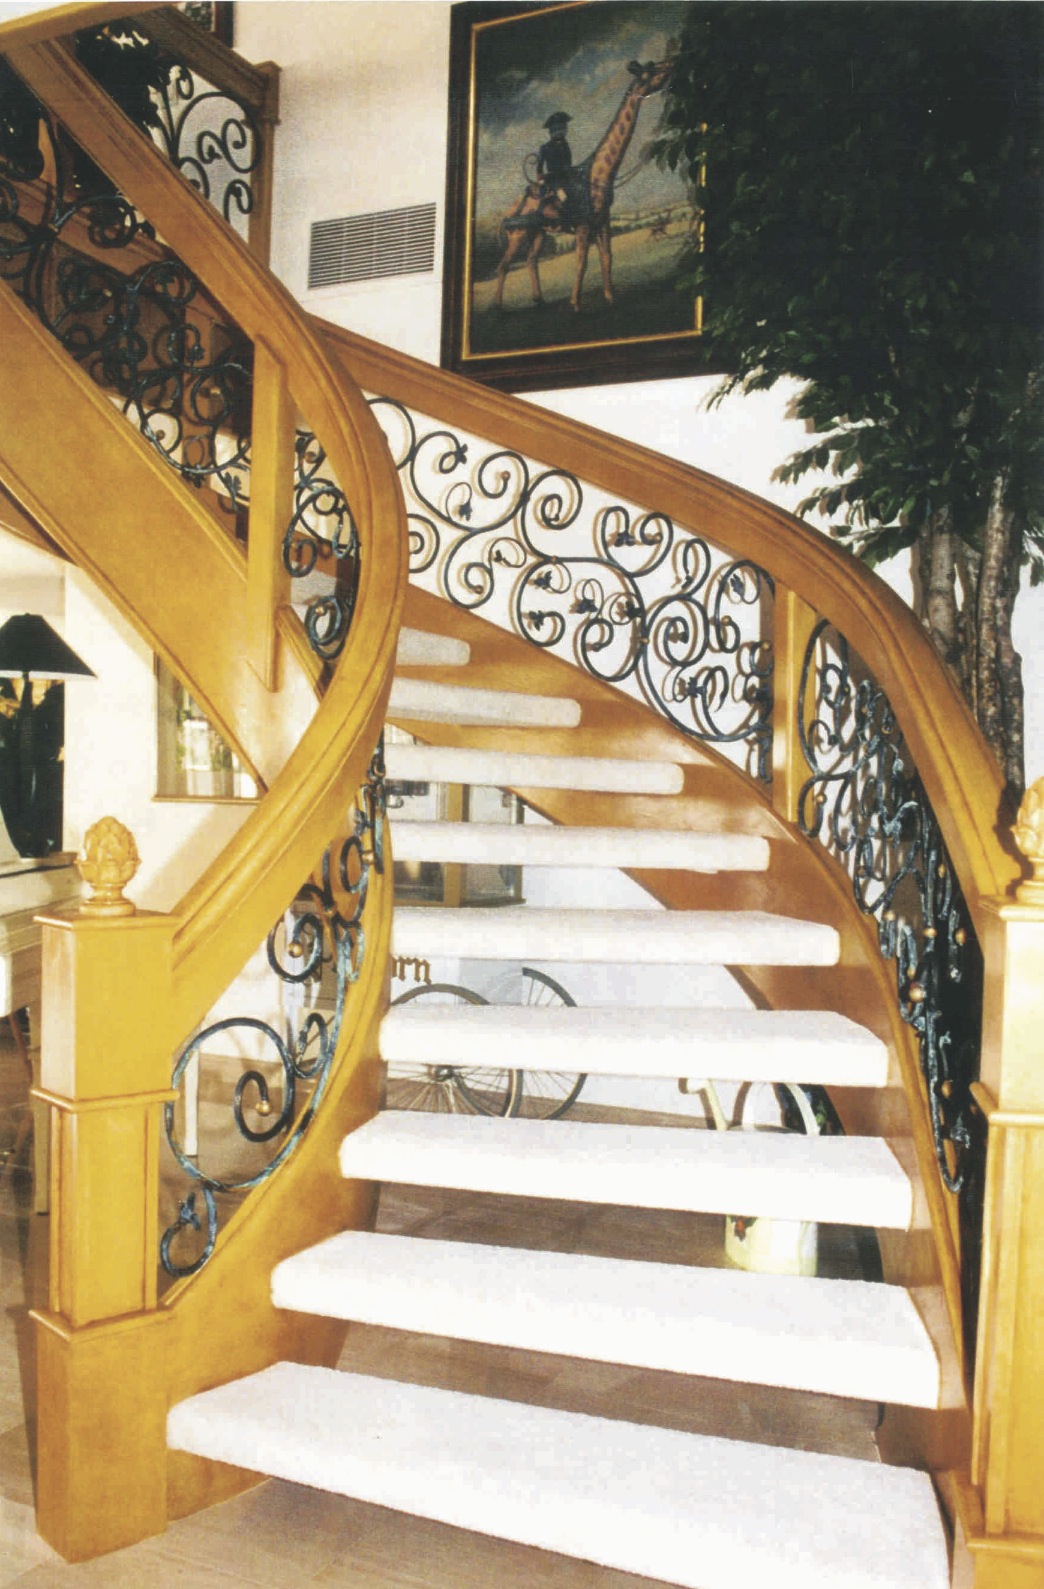 Reworked staircase and rail system, from black lacquer and lucite<br />to faux wood finish and custom iron work, view 2 - Palm City